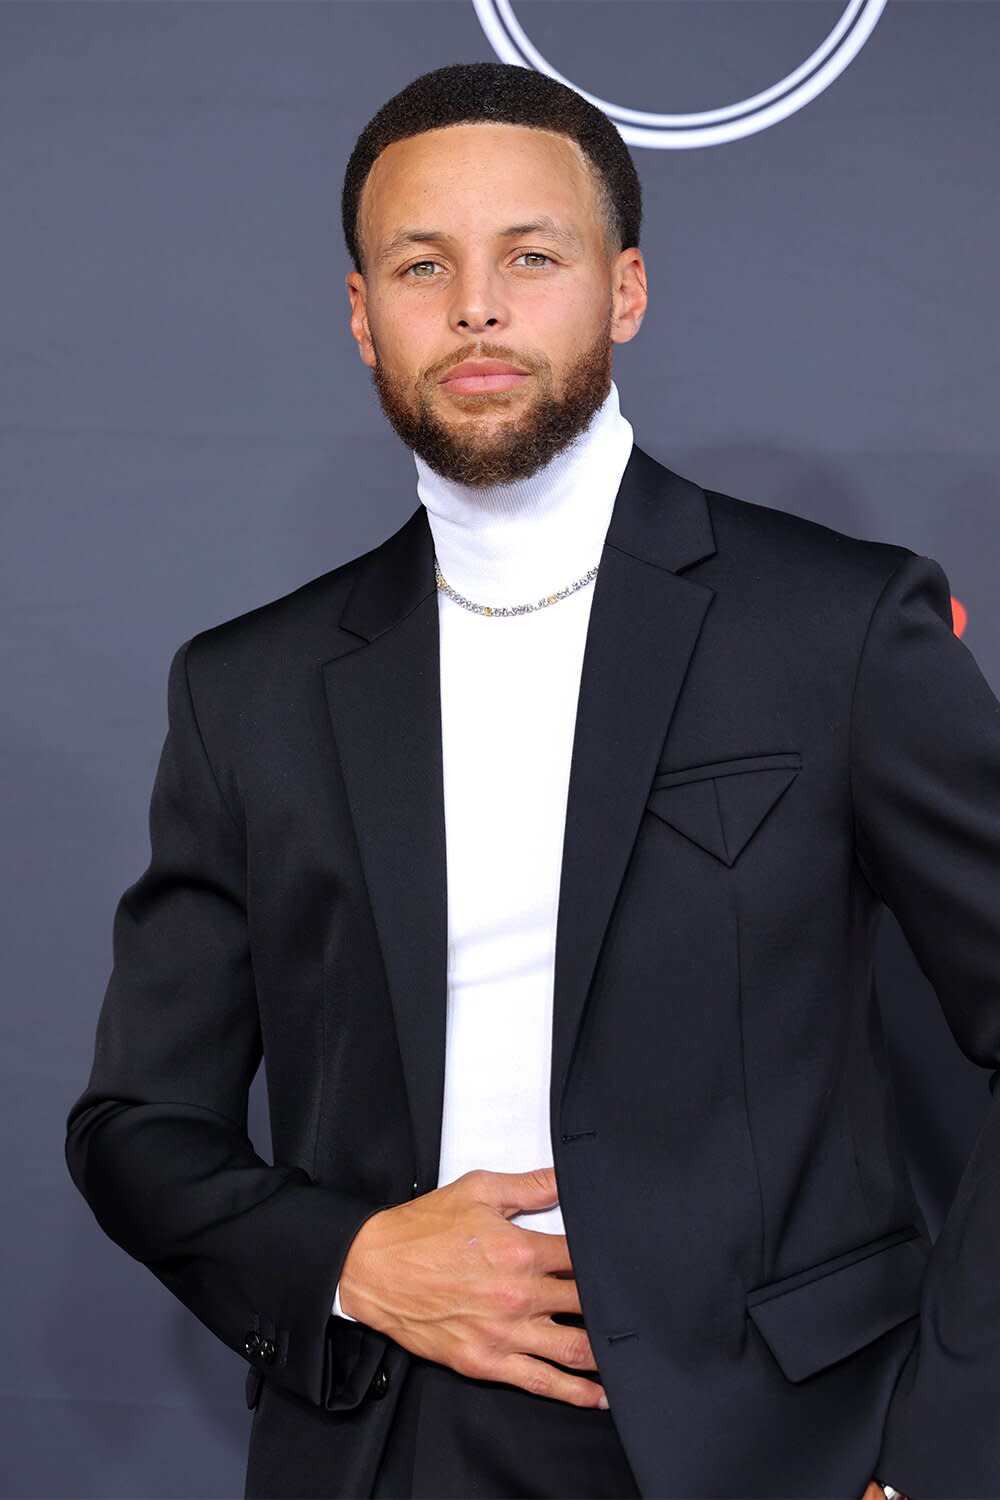 Stephen Curry attends the 2022 ESPYs at Dolby Theatre on July 20, 2022 in Hollywood, California.